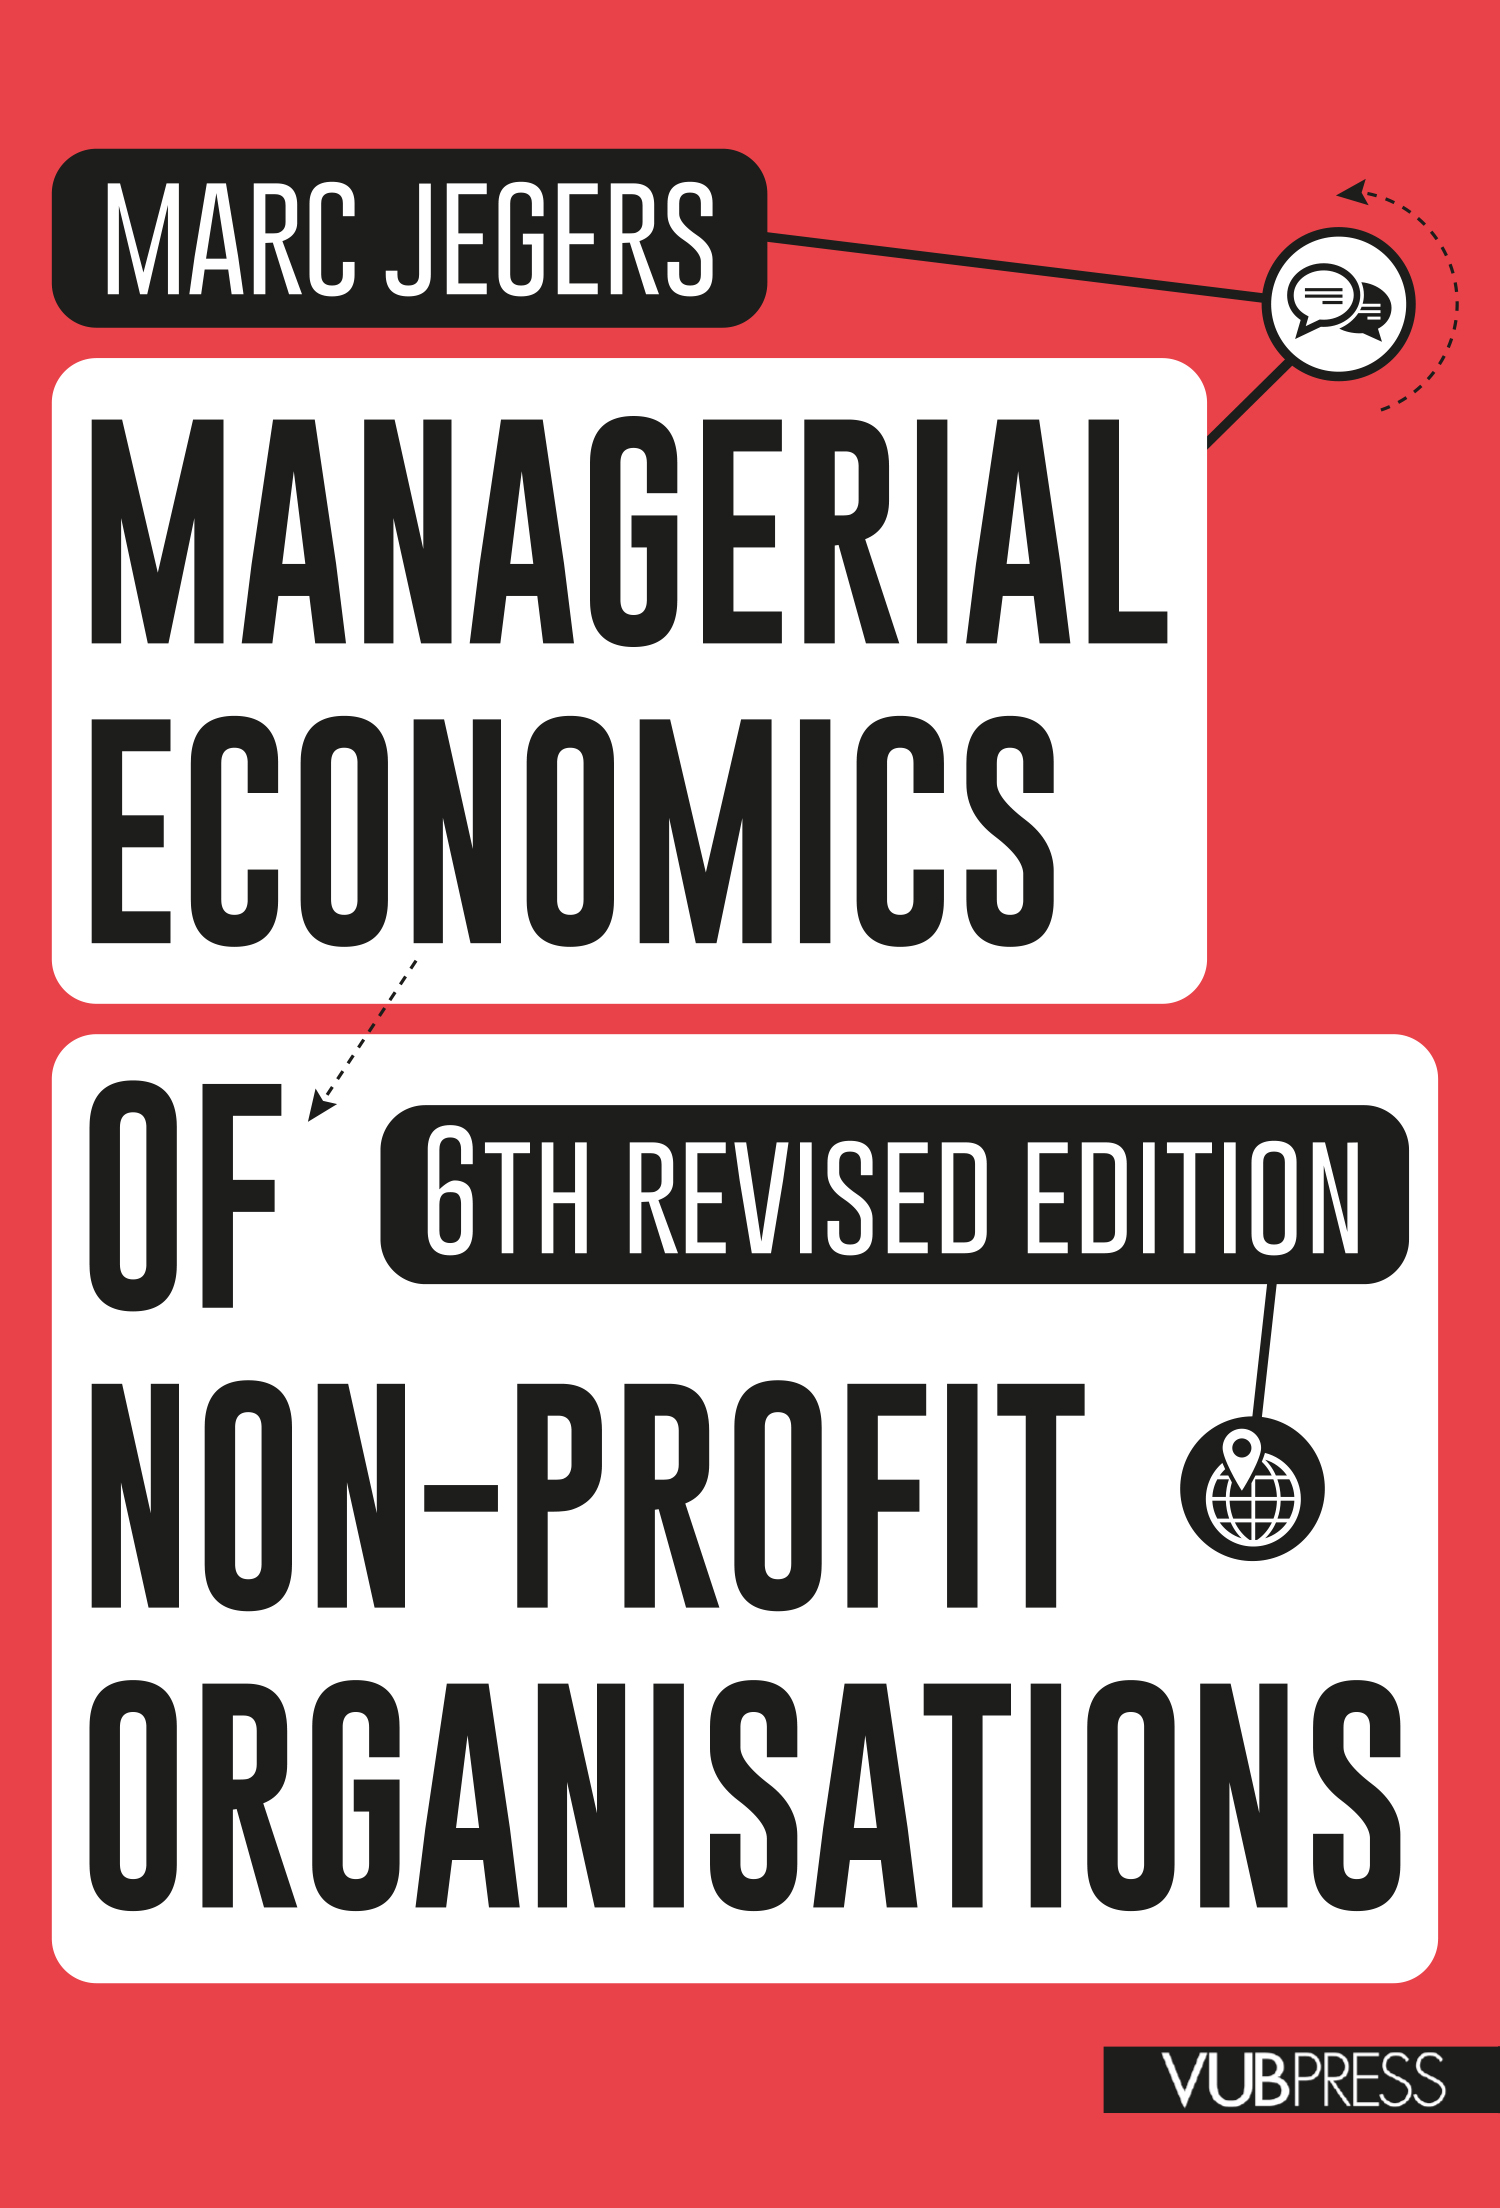 MANAGERIAL ECONOMICS OF NON-PROFIT ORGANISATIONS (6th revised edition)